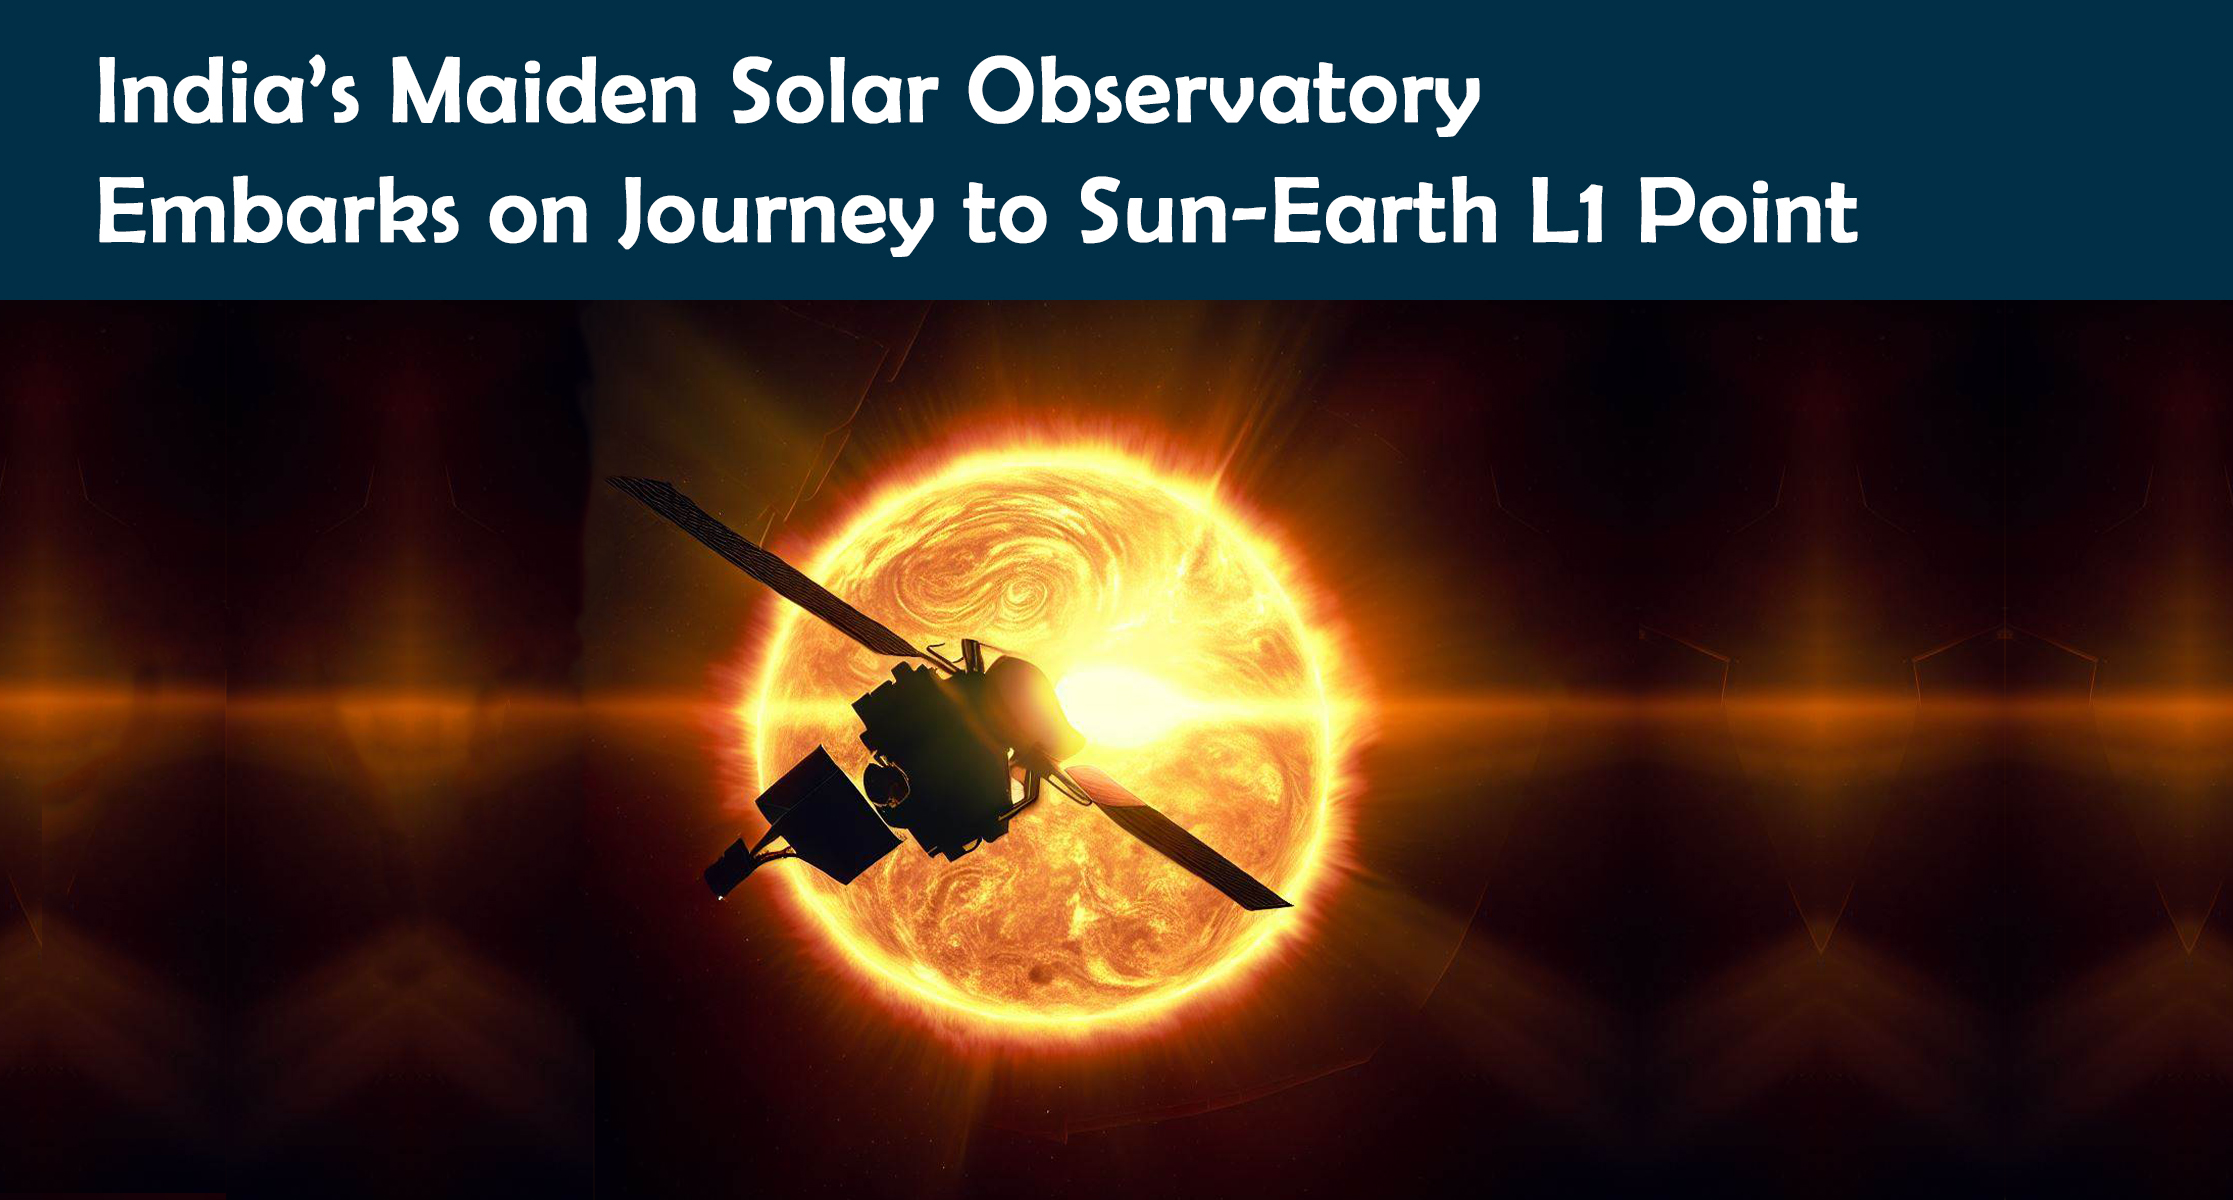 India’s Maiden Solar Observatory Embarks on Journey to Sun-Earth L1 Point